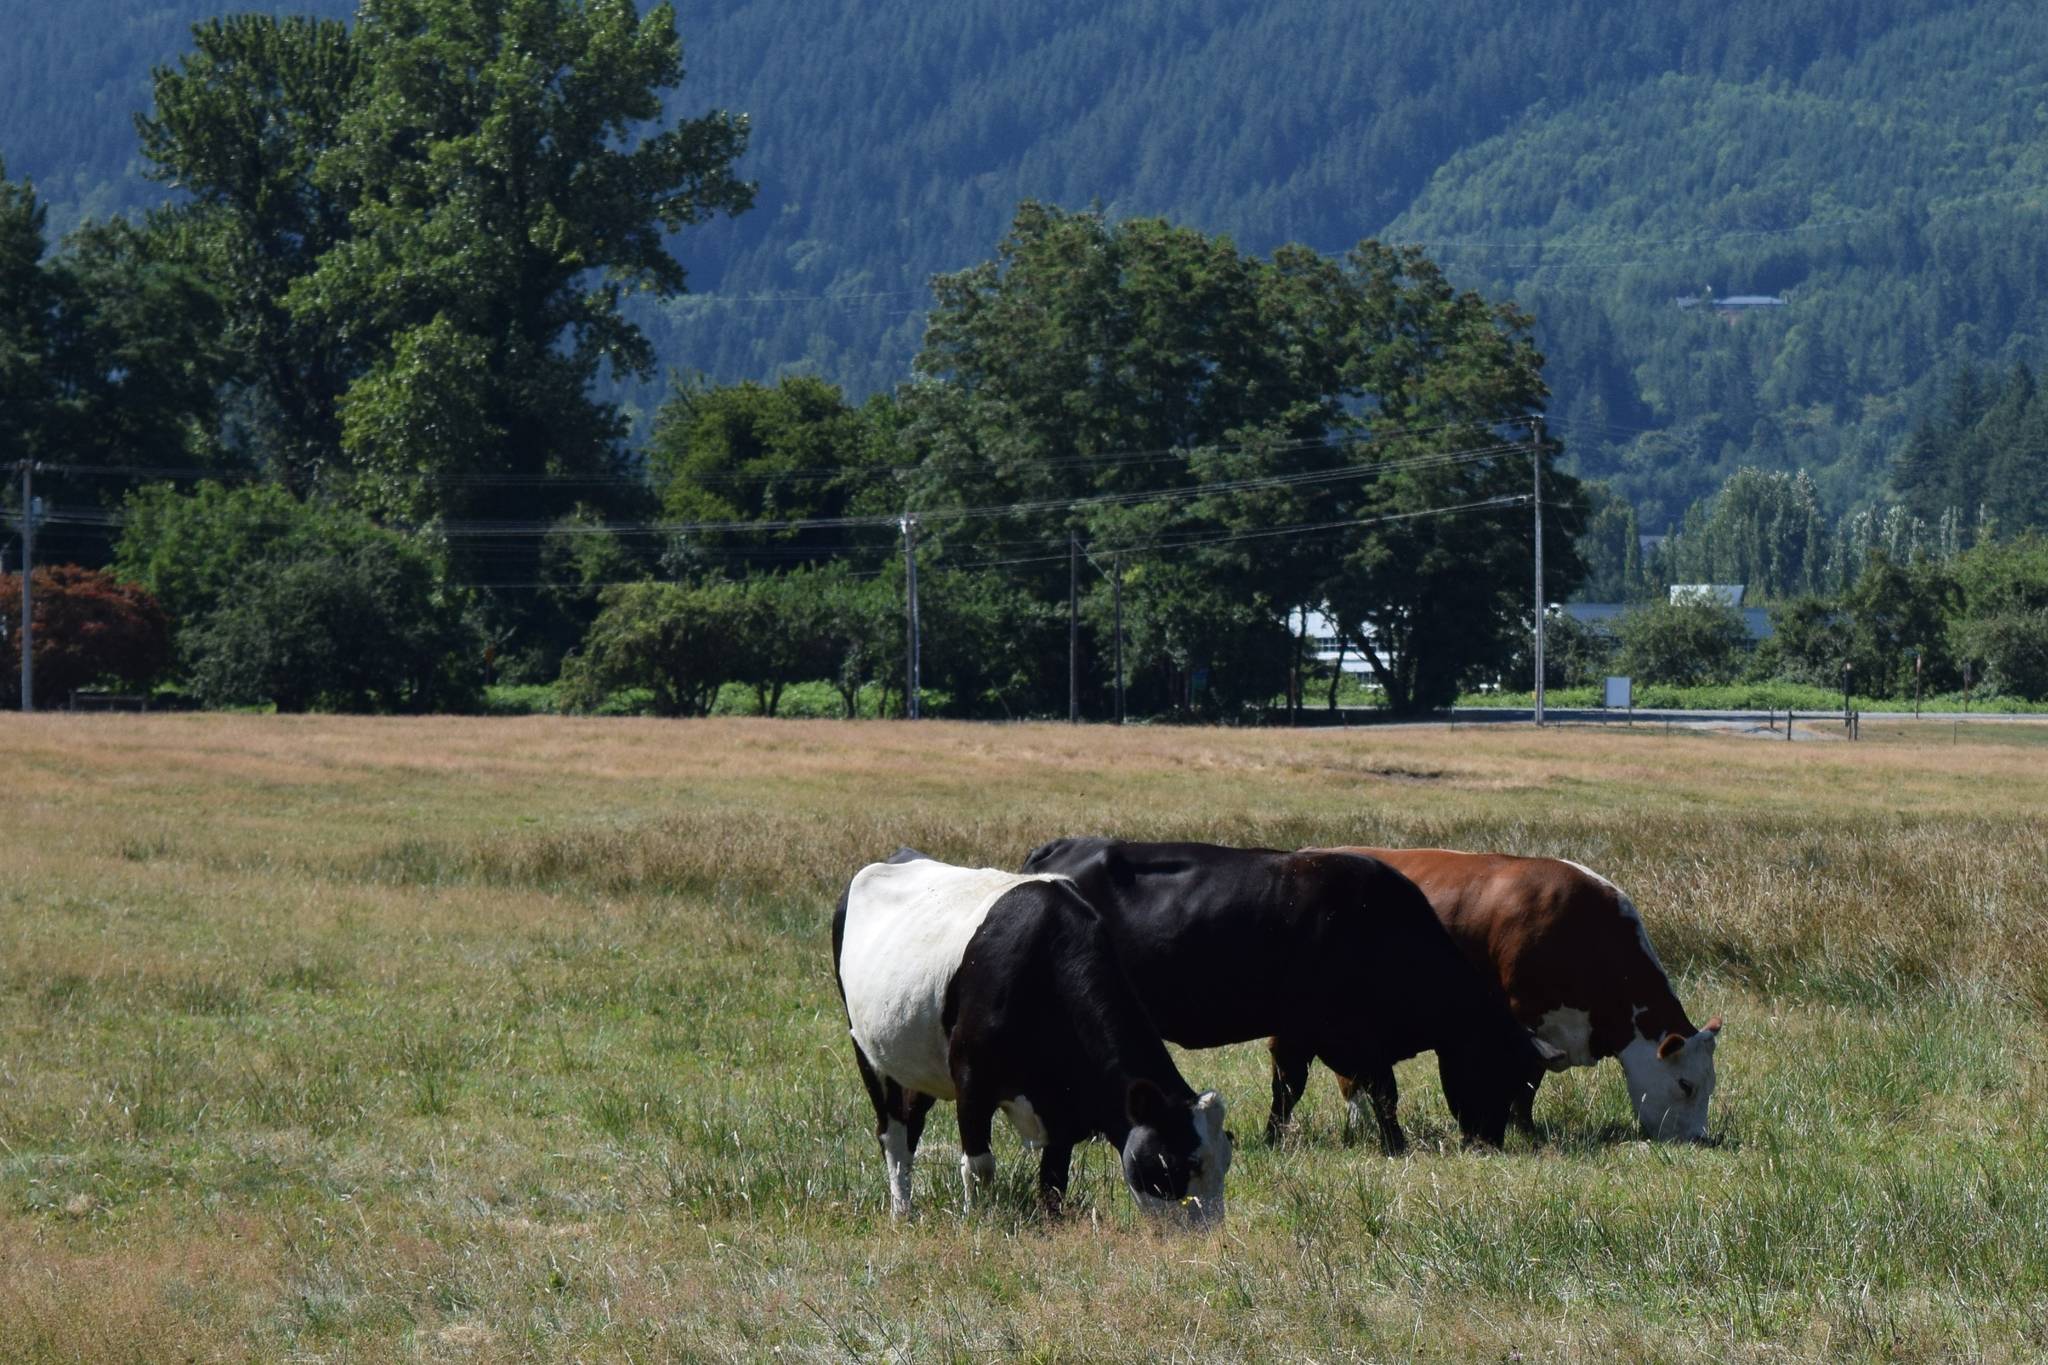 Cows at Tollgate Farm Park in North Bend. Photo by Conor Wilson/Valley Record